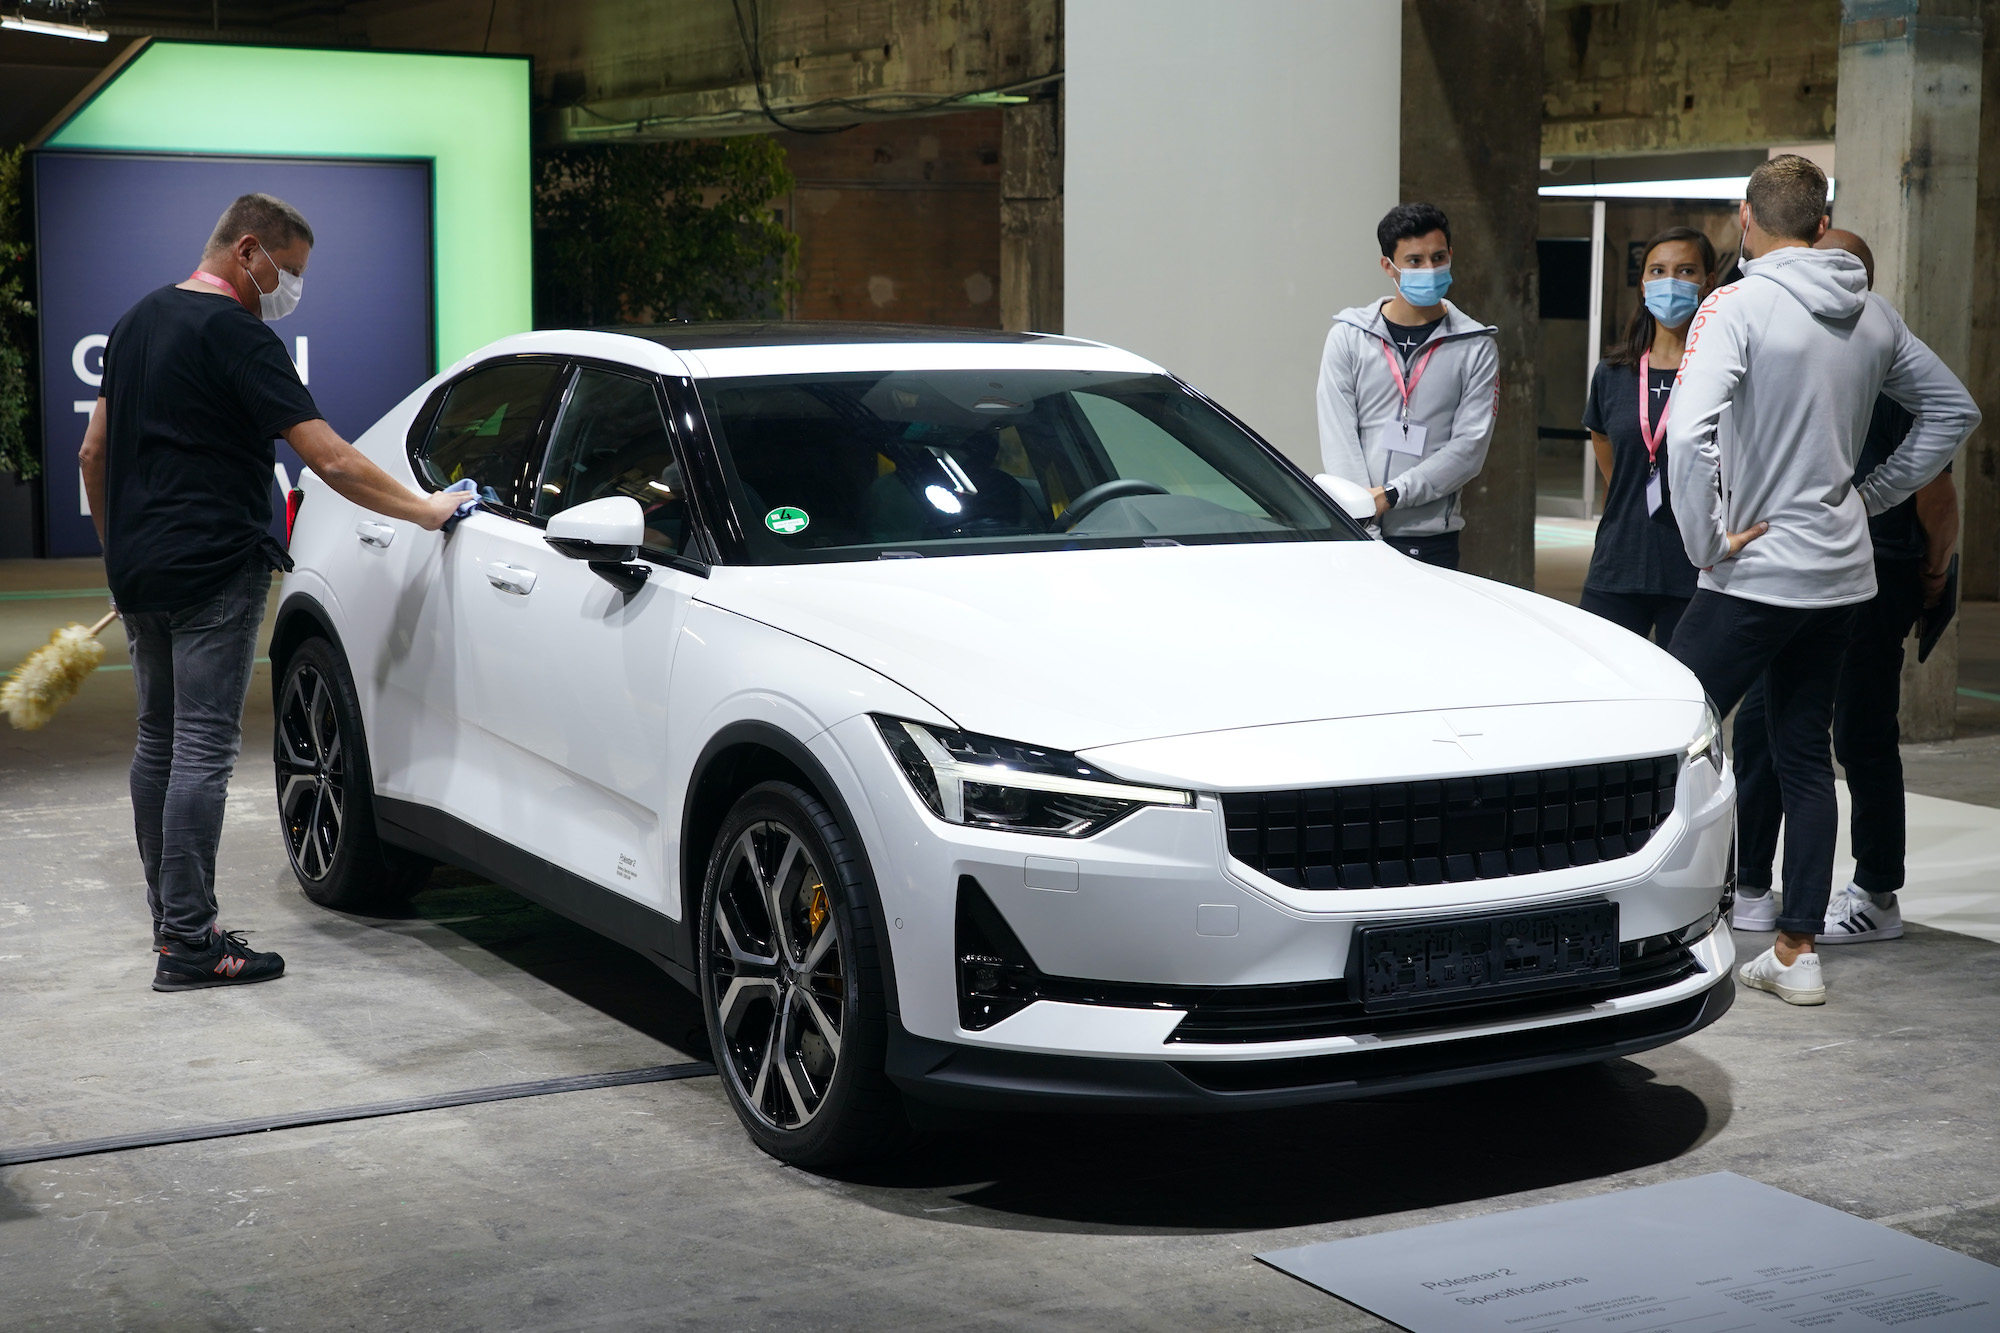 A Polestar 2 electric car stands on display at a press preview at the Greentech Festival